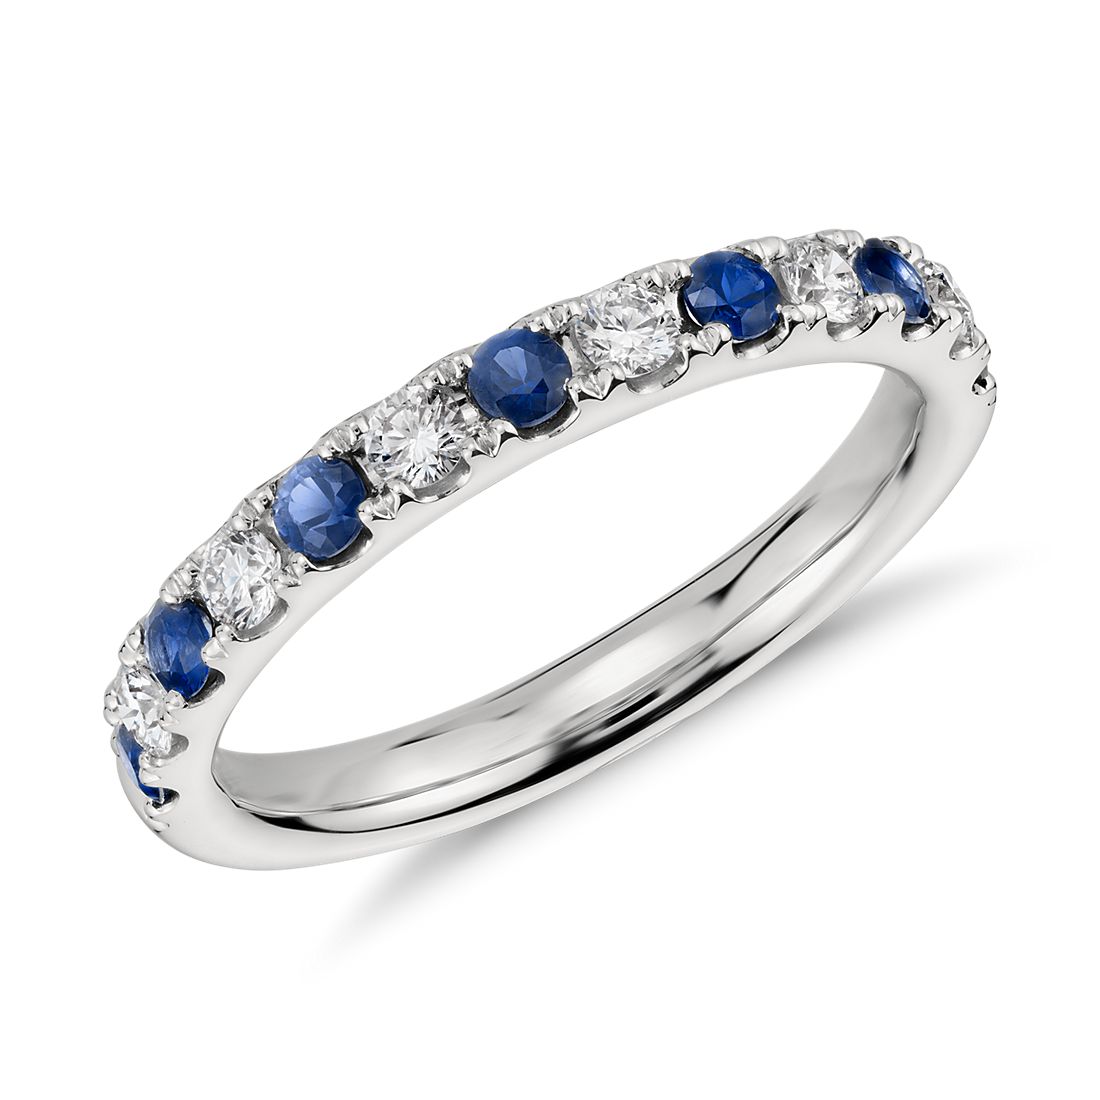 Riviera Pave Sapphire and Diamond Ring in Platinum (2.2 mm)